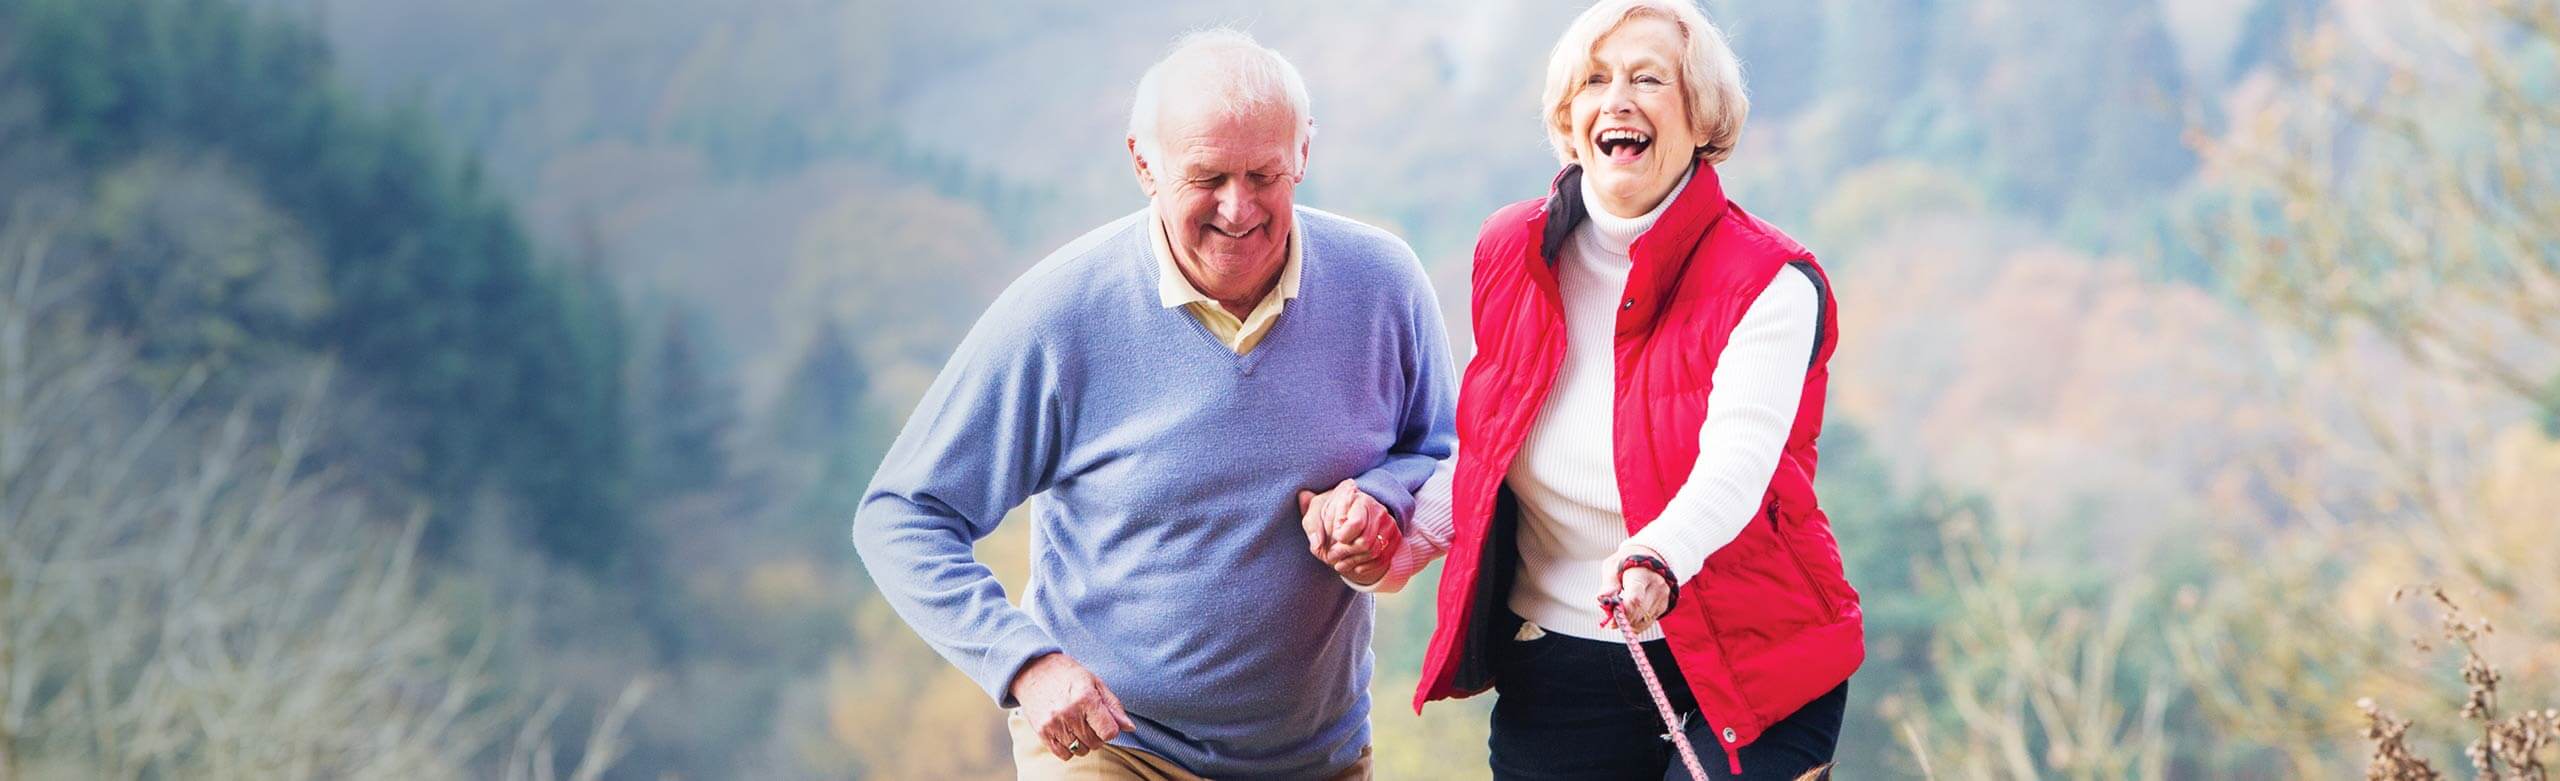 Man and woman walking outside while holding hands and laughing